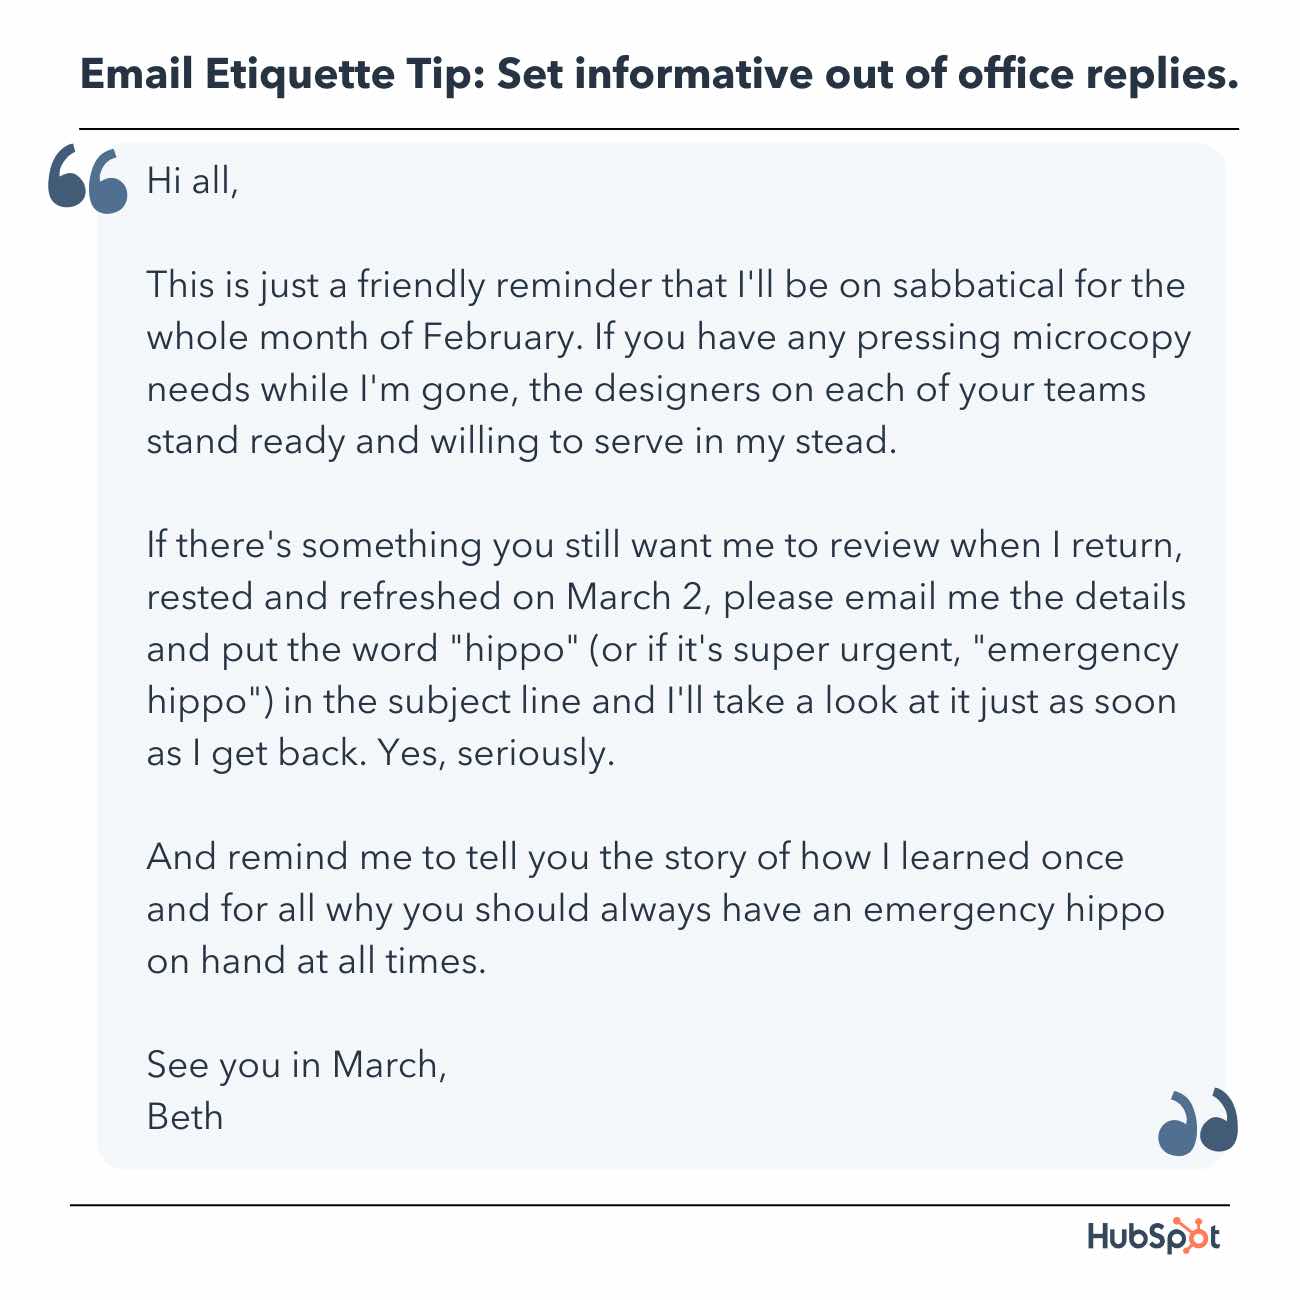 email etiquette, out-of-office email example